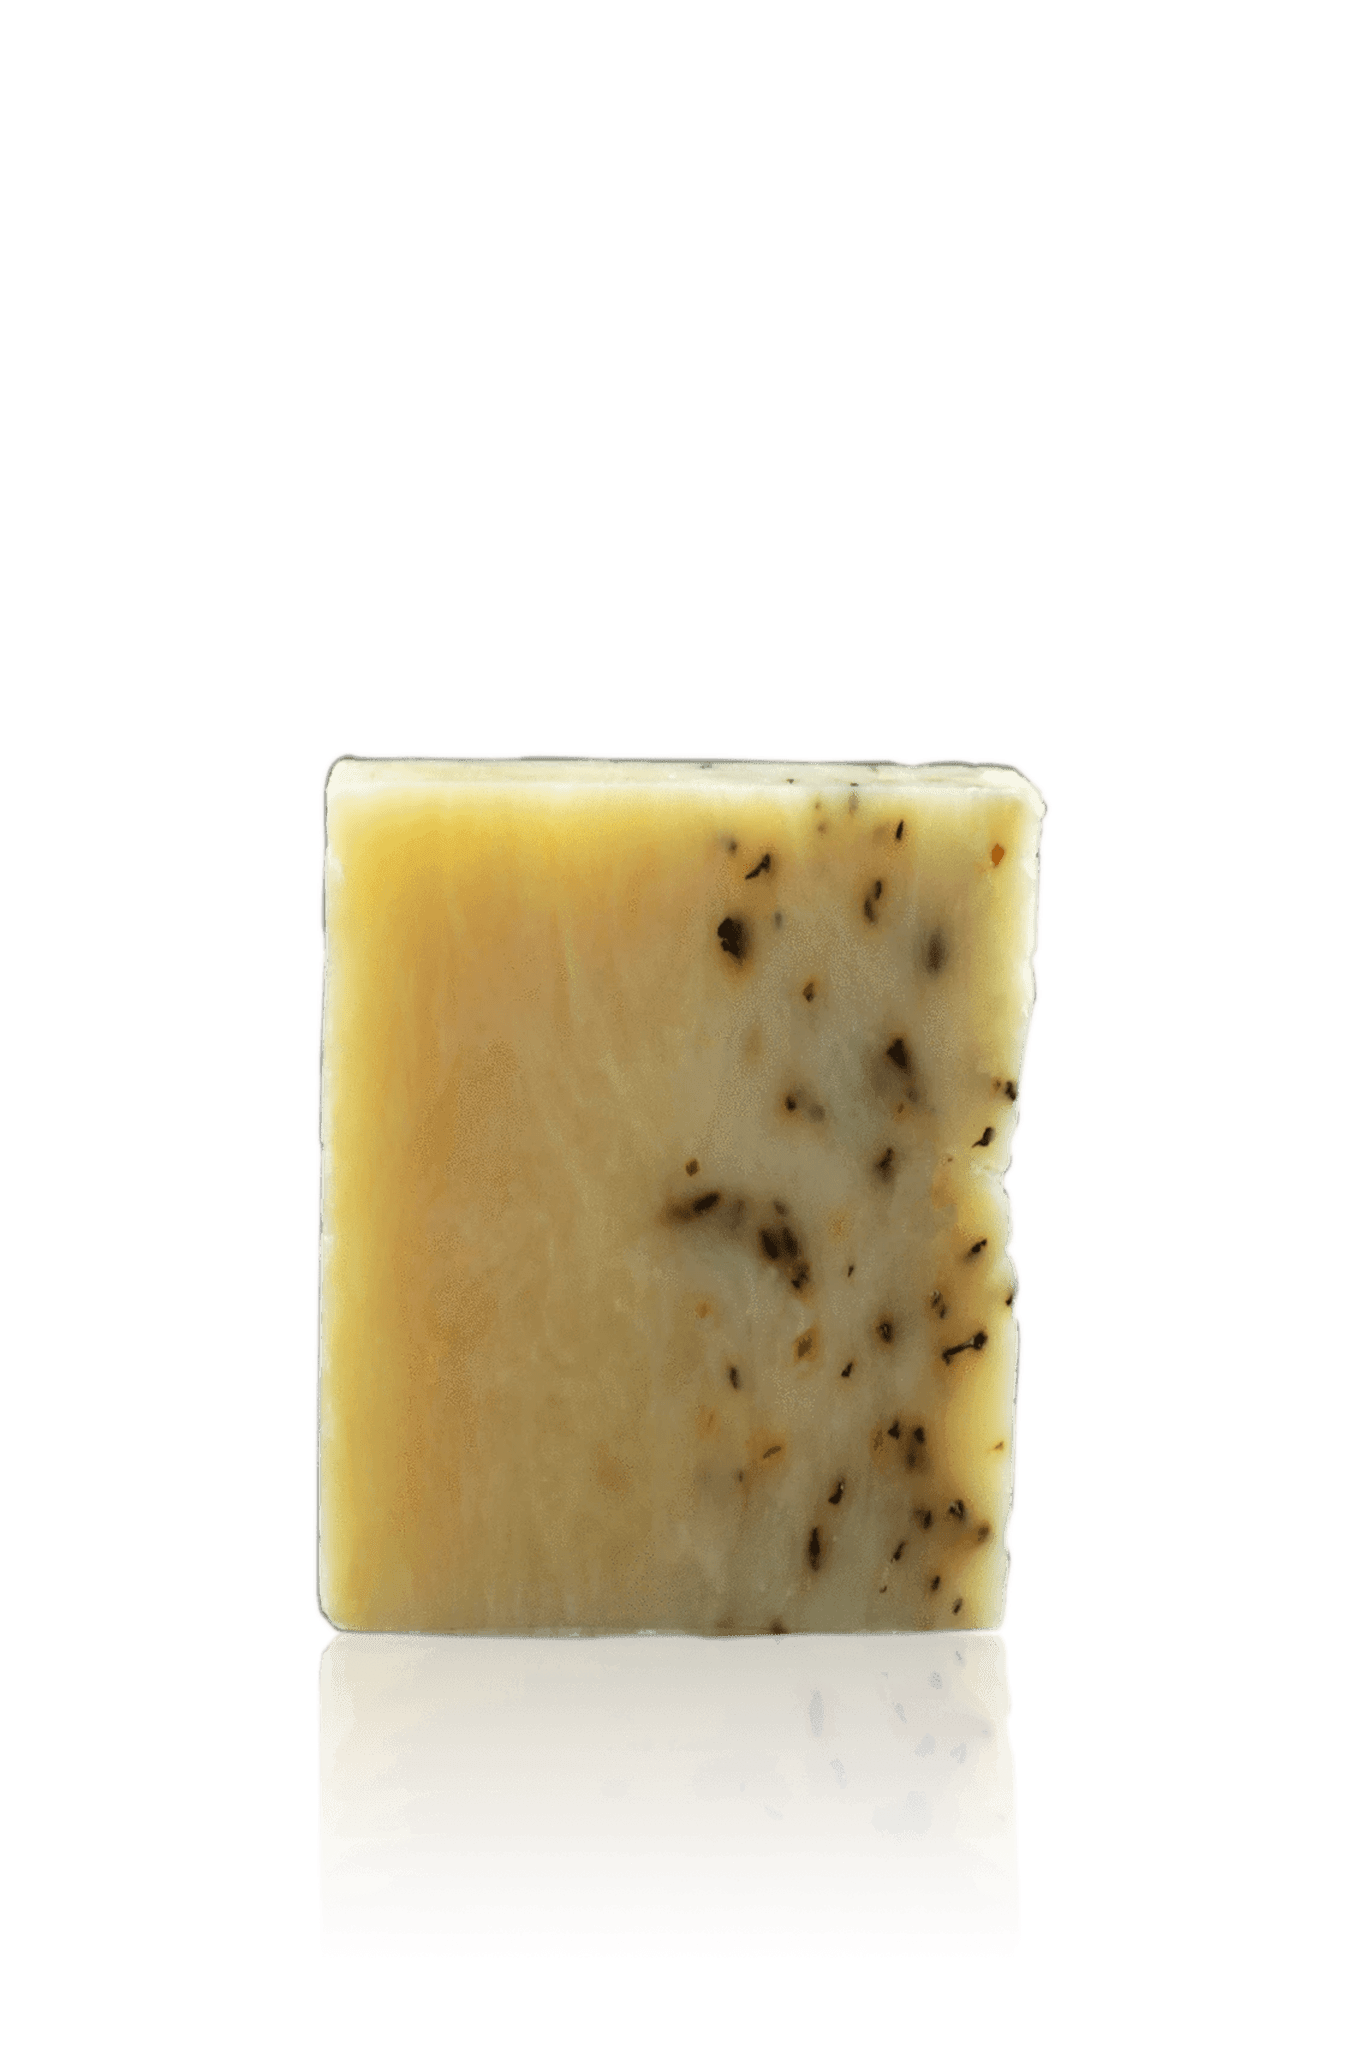 How to Buy a Men's Soap Bar – Brickell Men's Products®